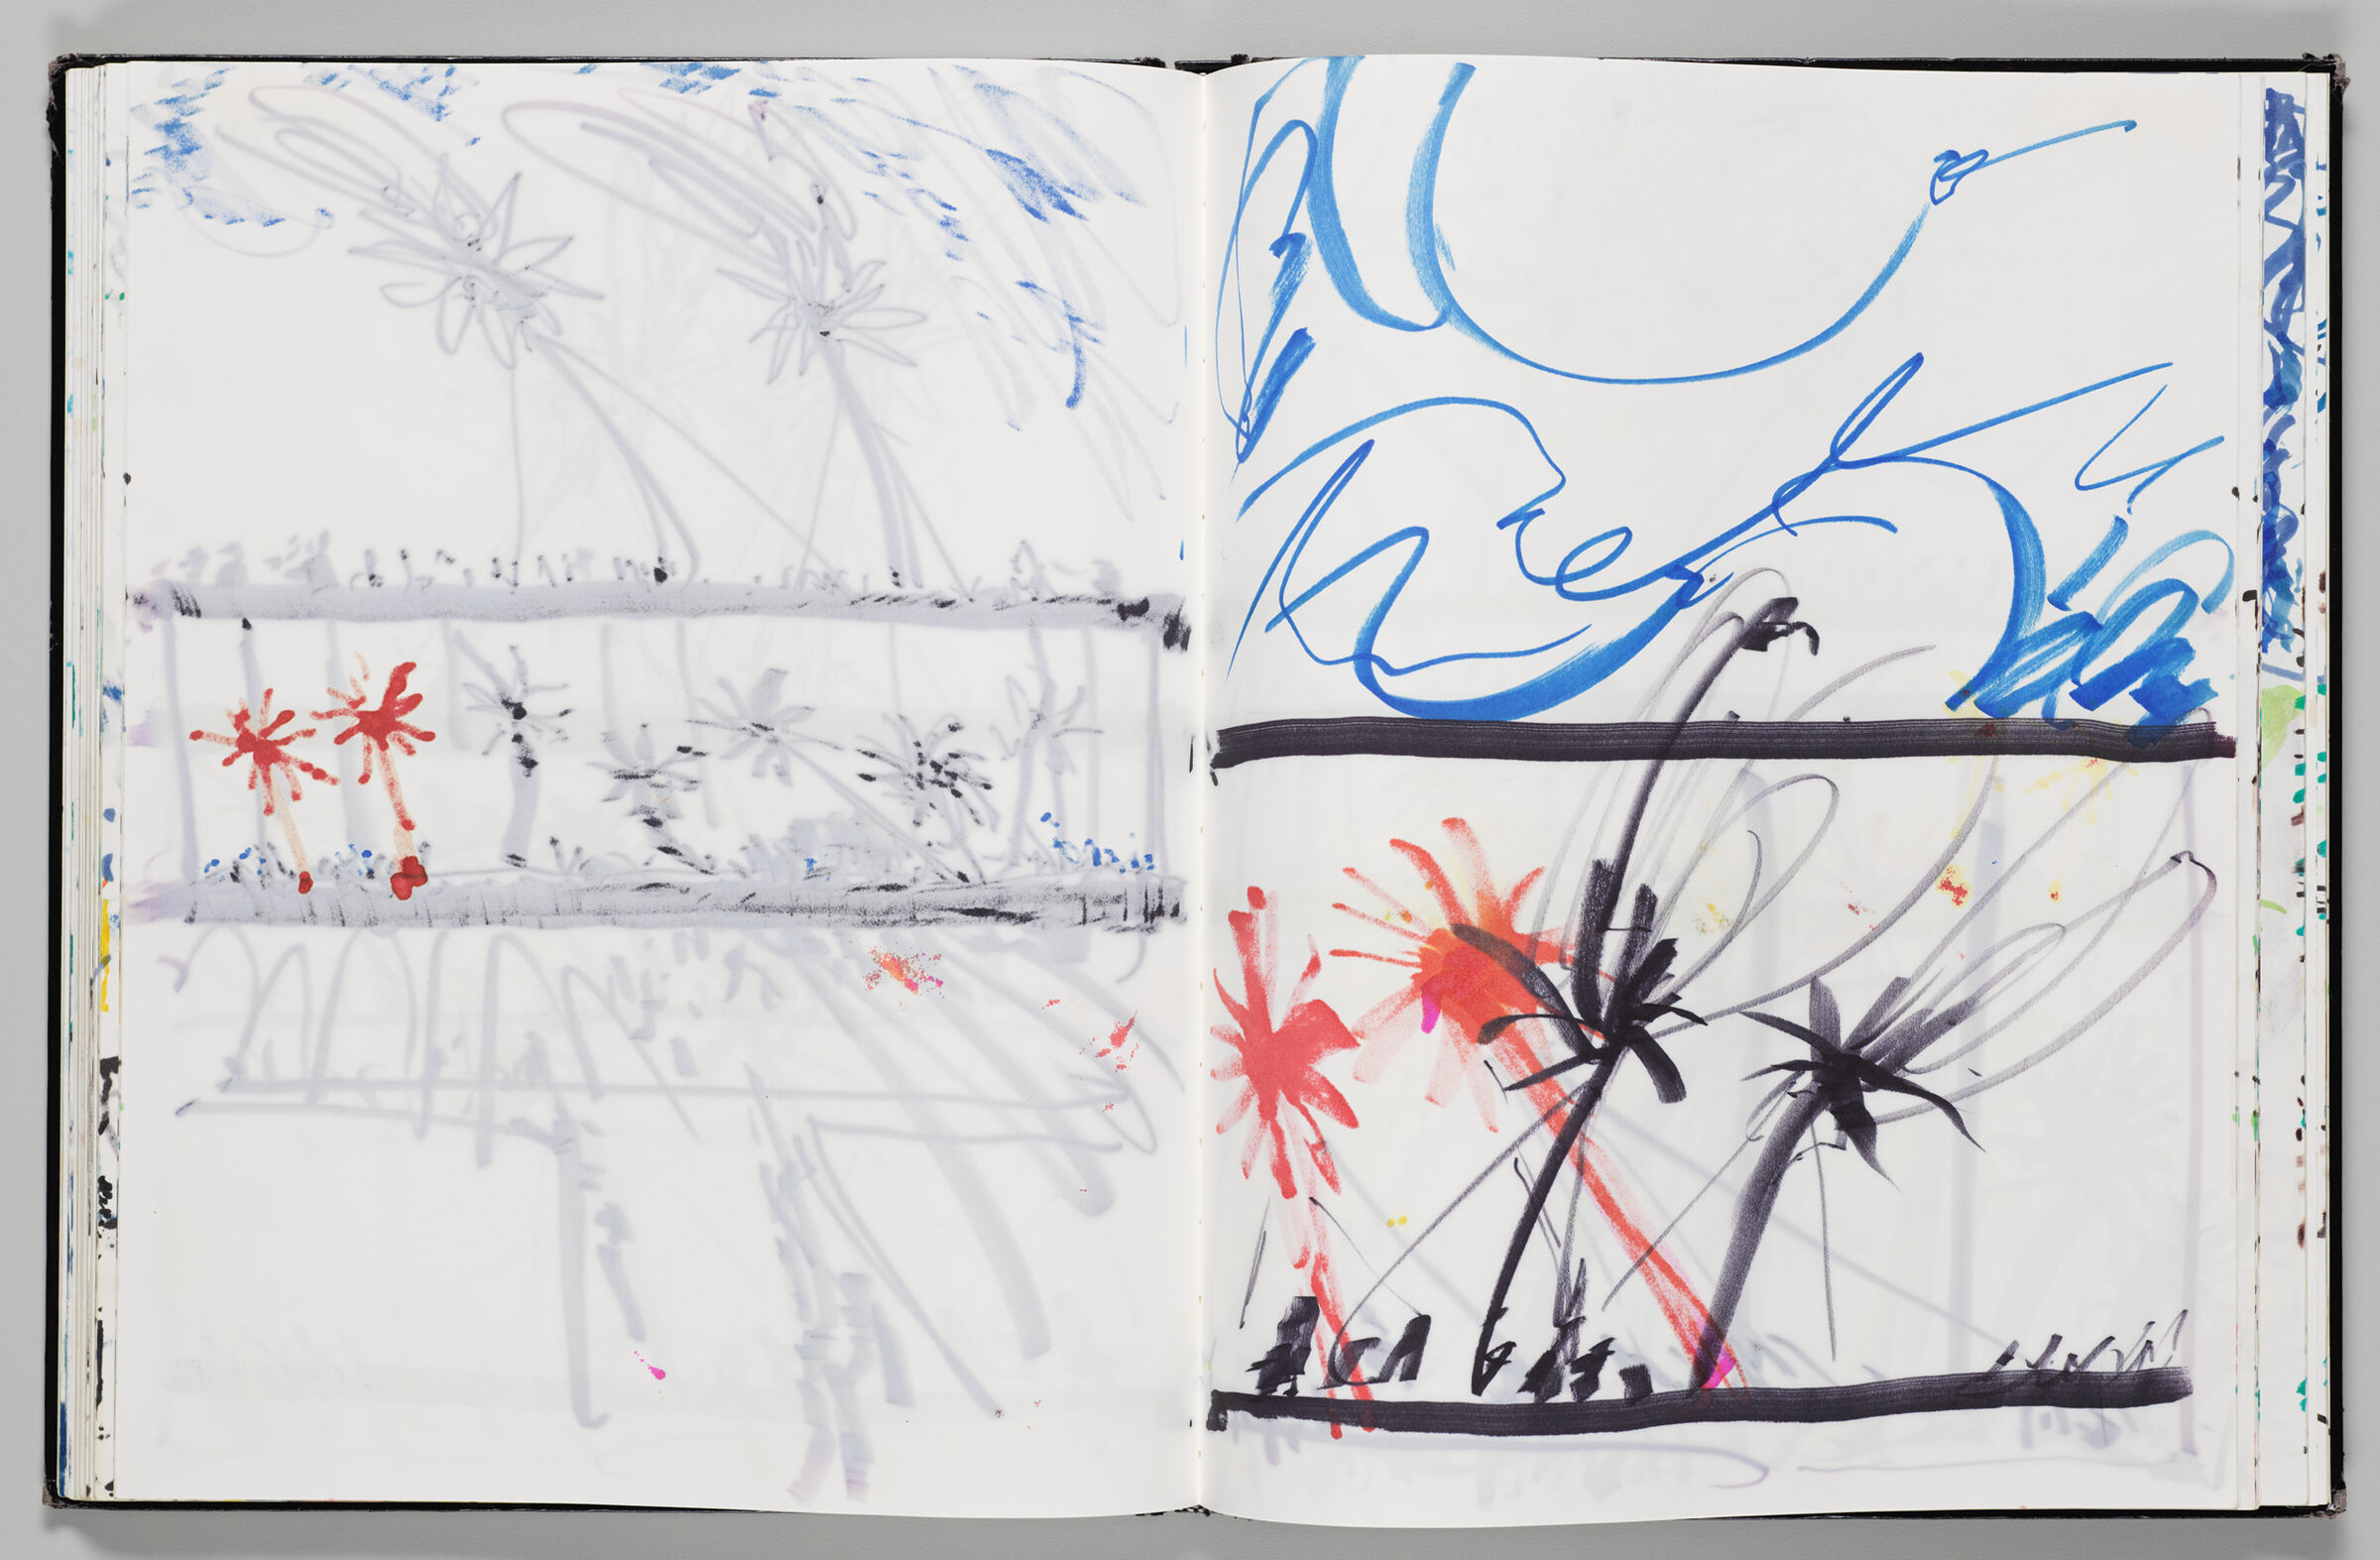 Untitled (Bleed-Through Of Previous Page And Color Transfer, Left Page); Untitled (Design For Neue Nationalgalerie Inflatables Over Bleed-Through Of Following Page And Color Transfer, Right Page)